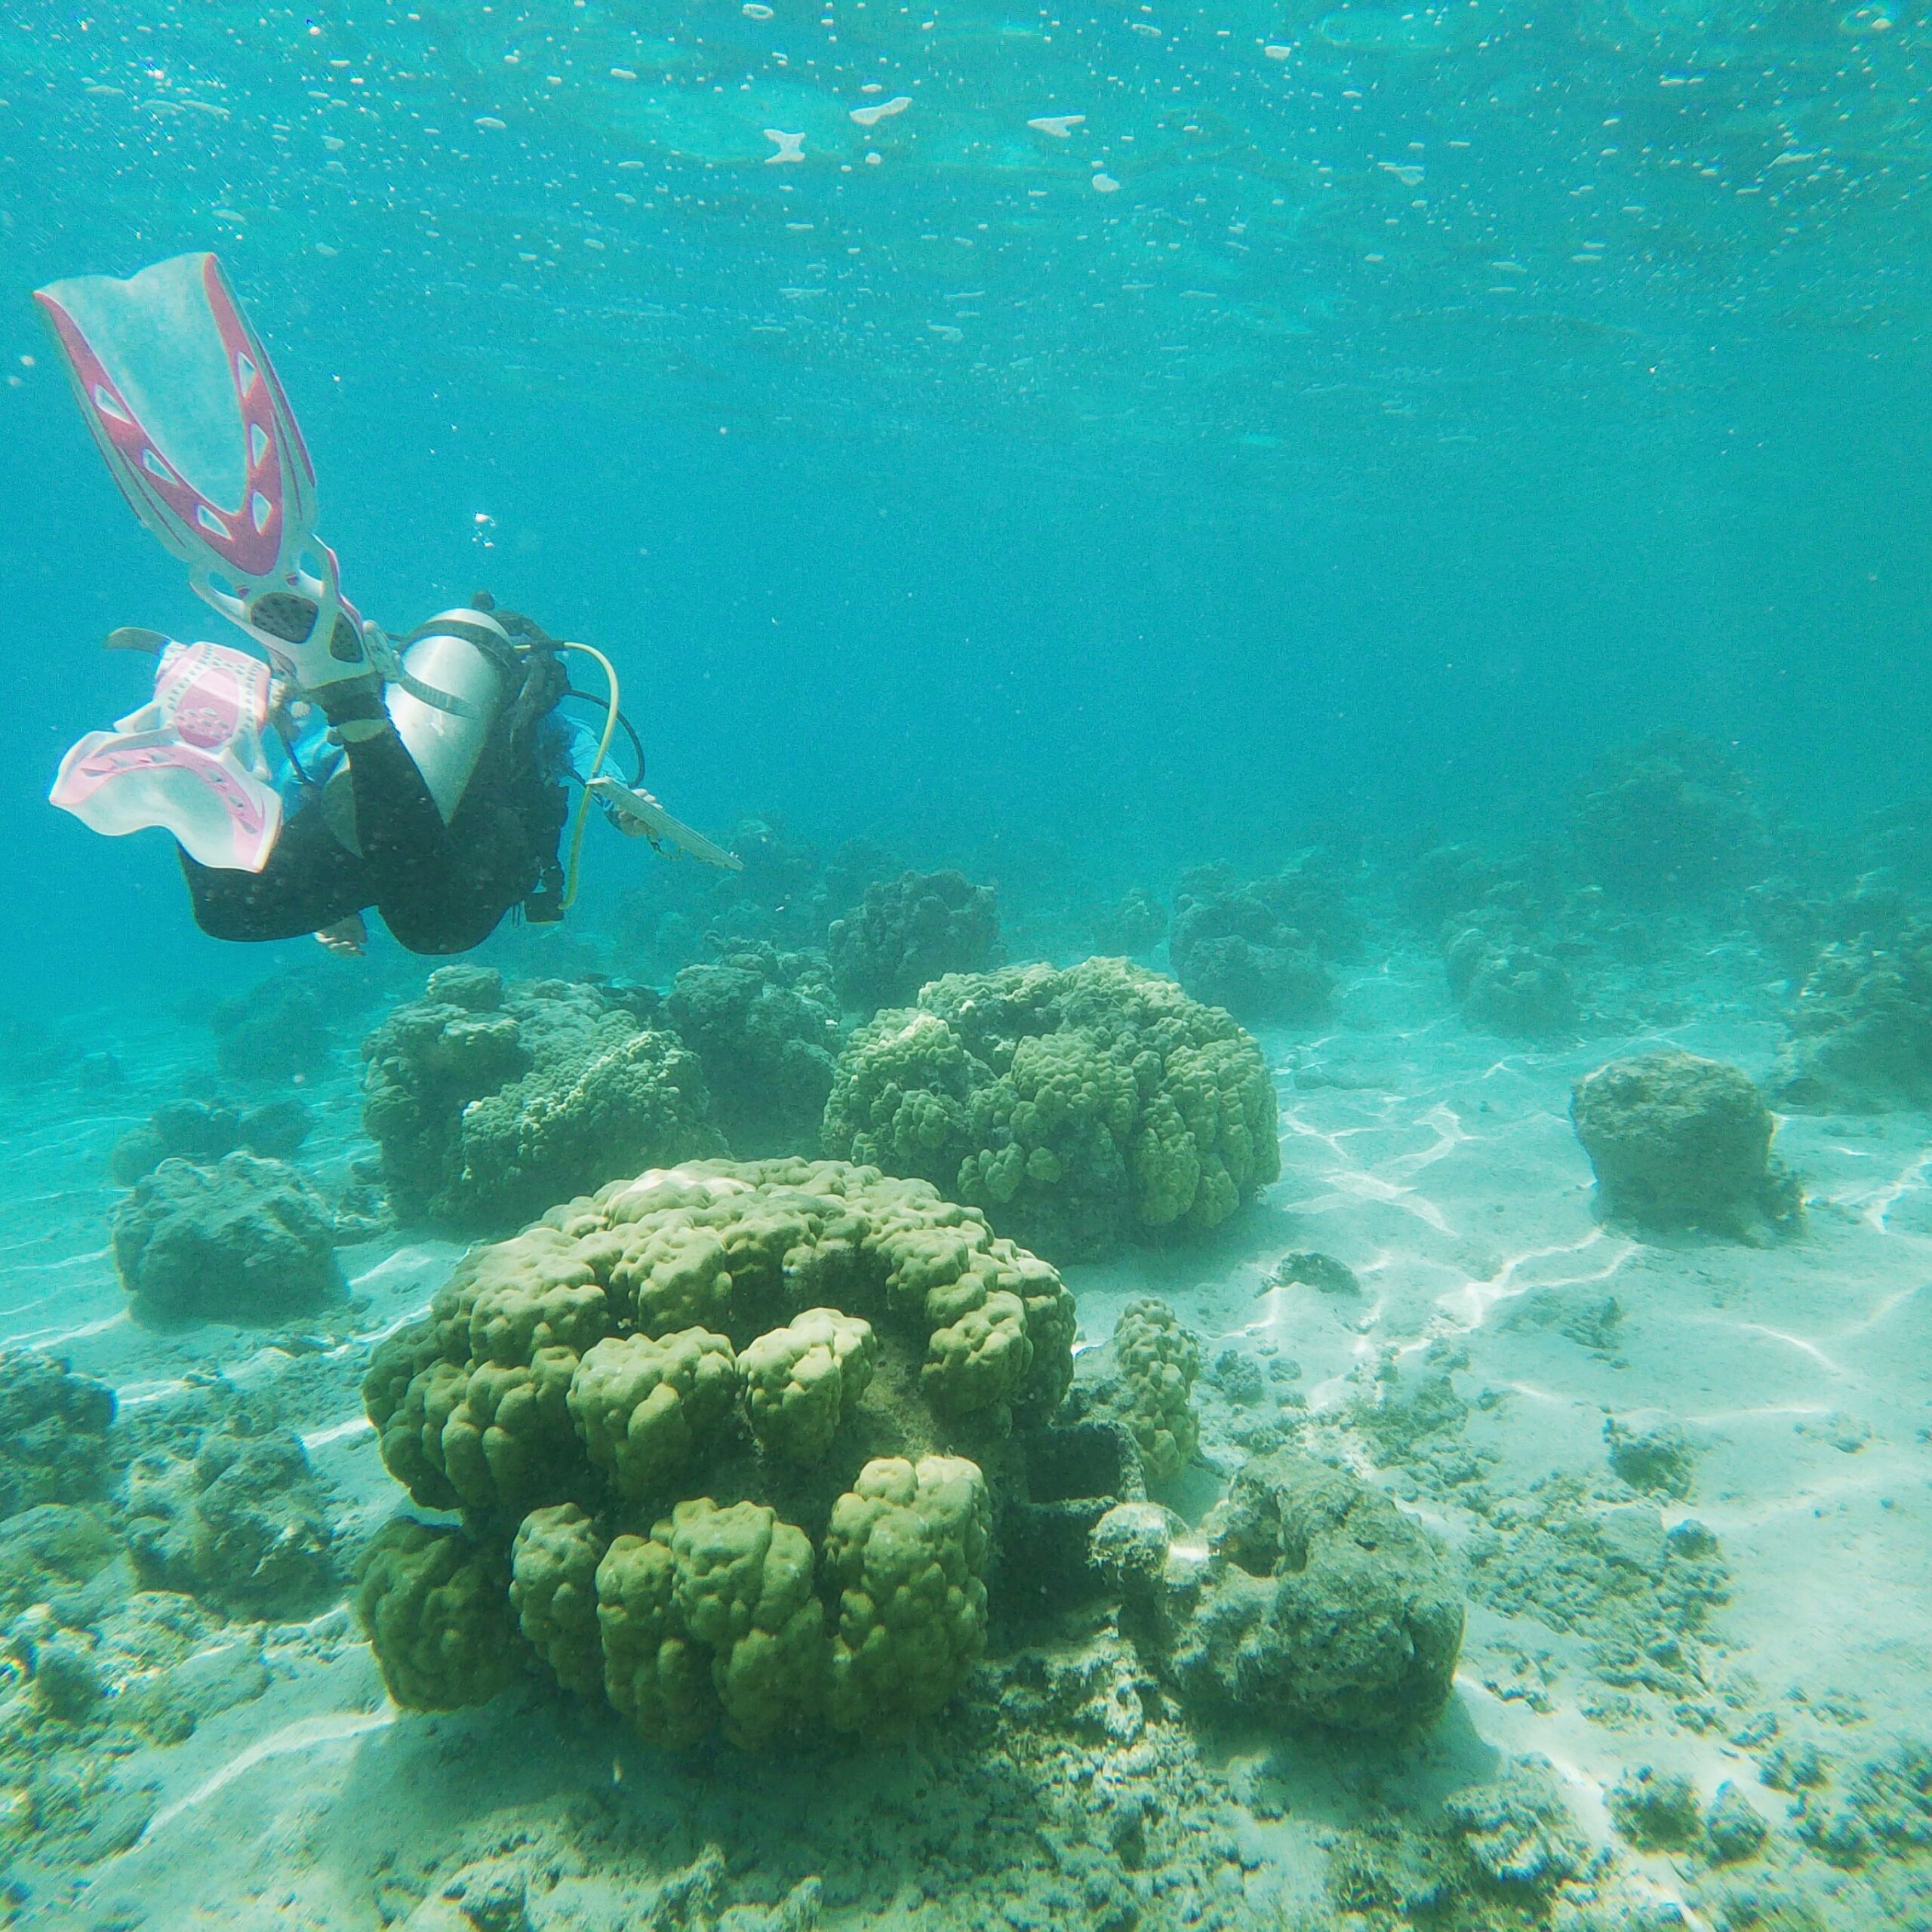 SCUBA diving in the fringing reefs of Mo'orea, French Polynesia for my PhD research to collect data on how nutrient runoff impacts coral reef species.